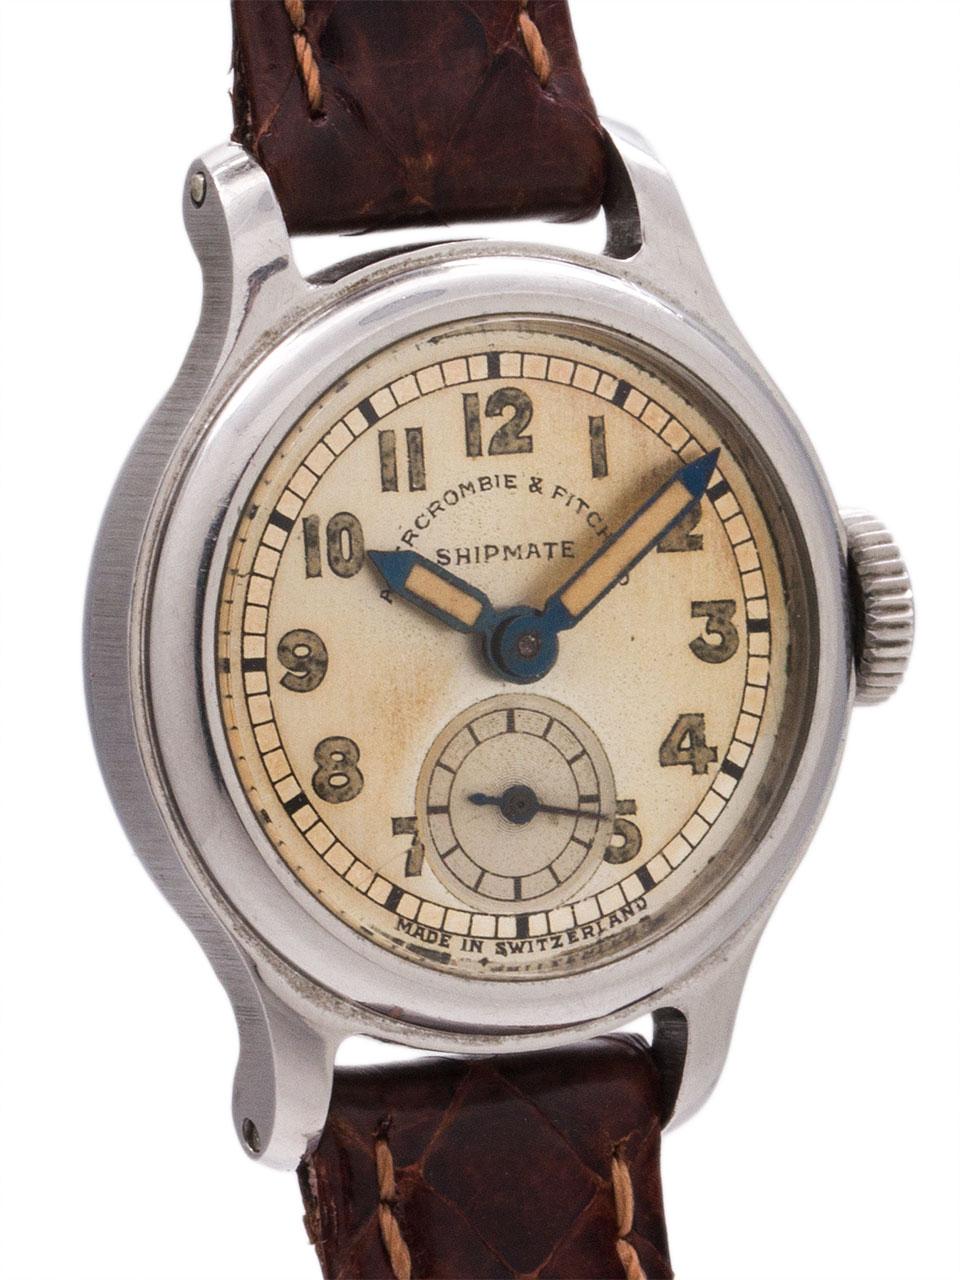 Women's or Men's Abercrombie & Fitch Ladies stainless steel “Shipmate” manual Wristwatch, c 1940s